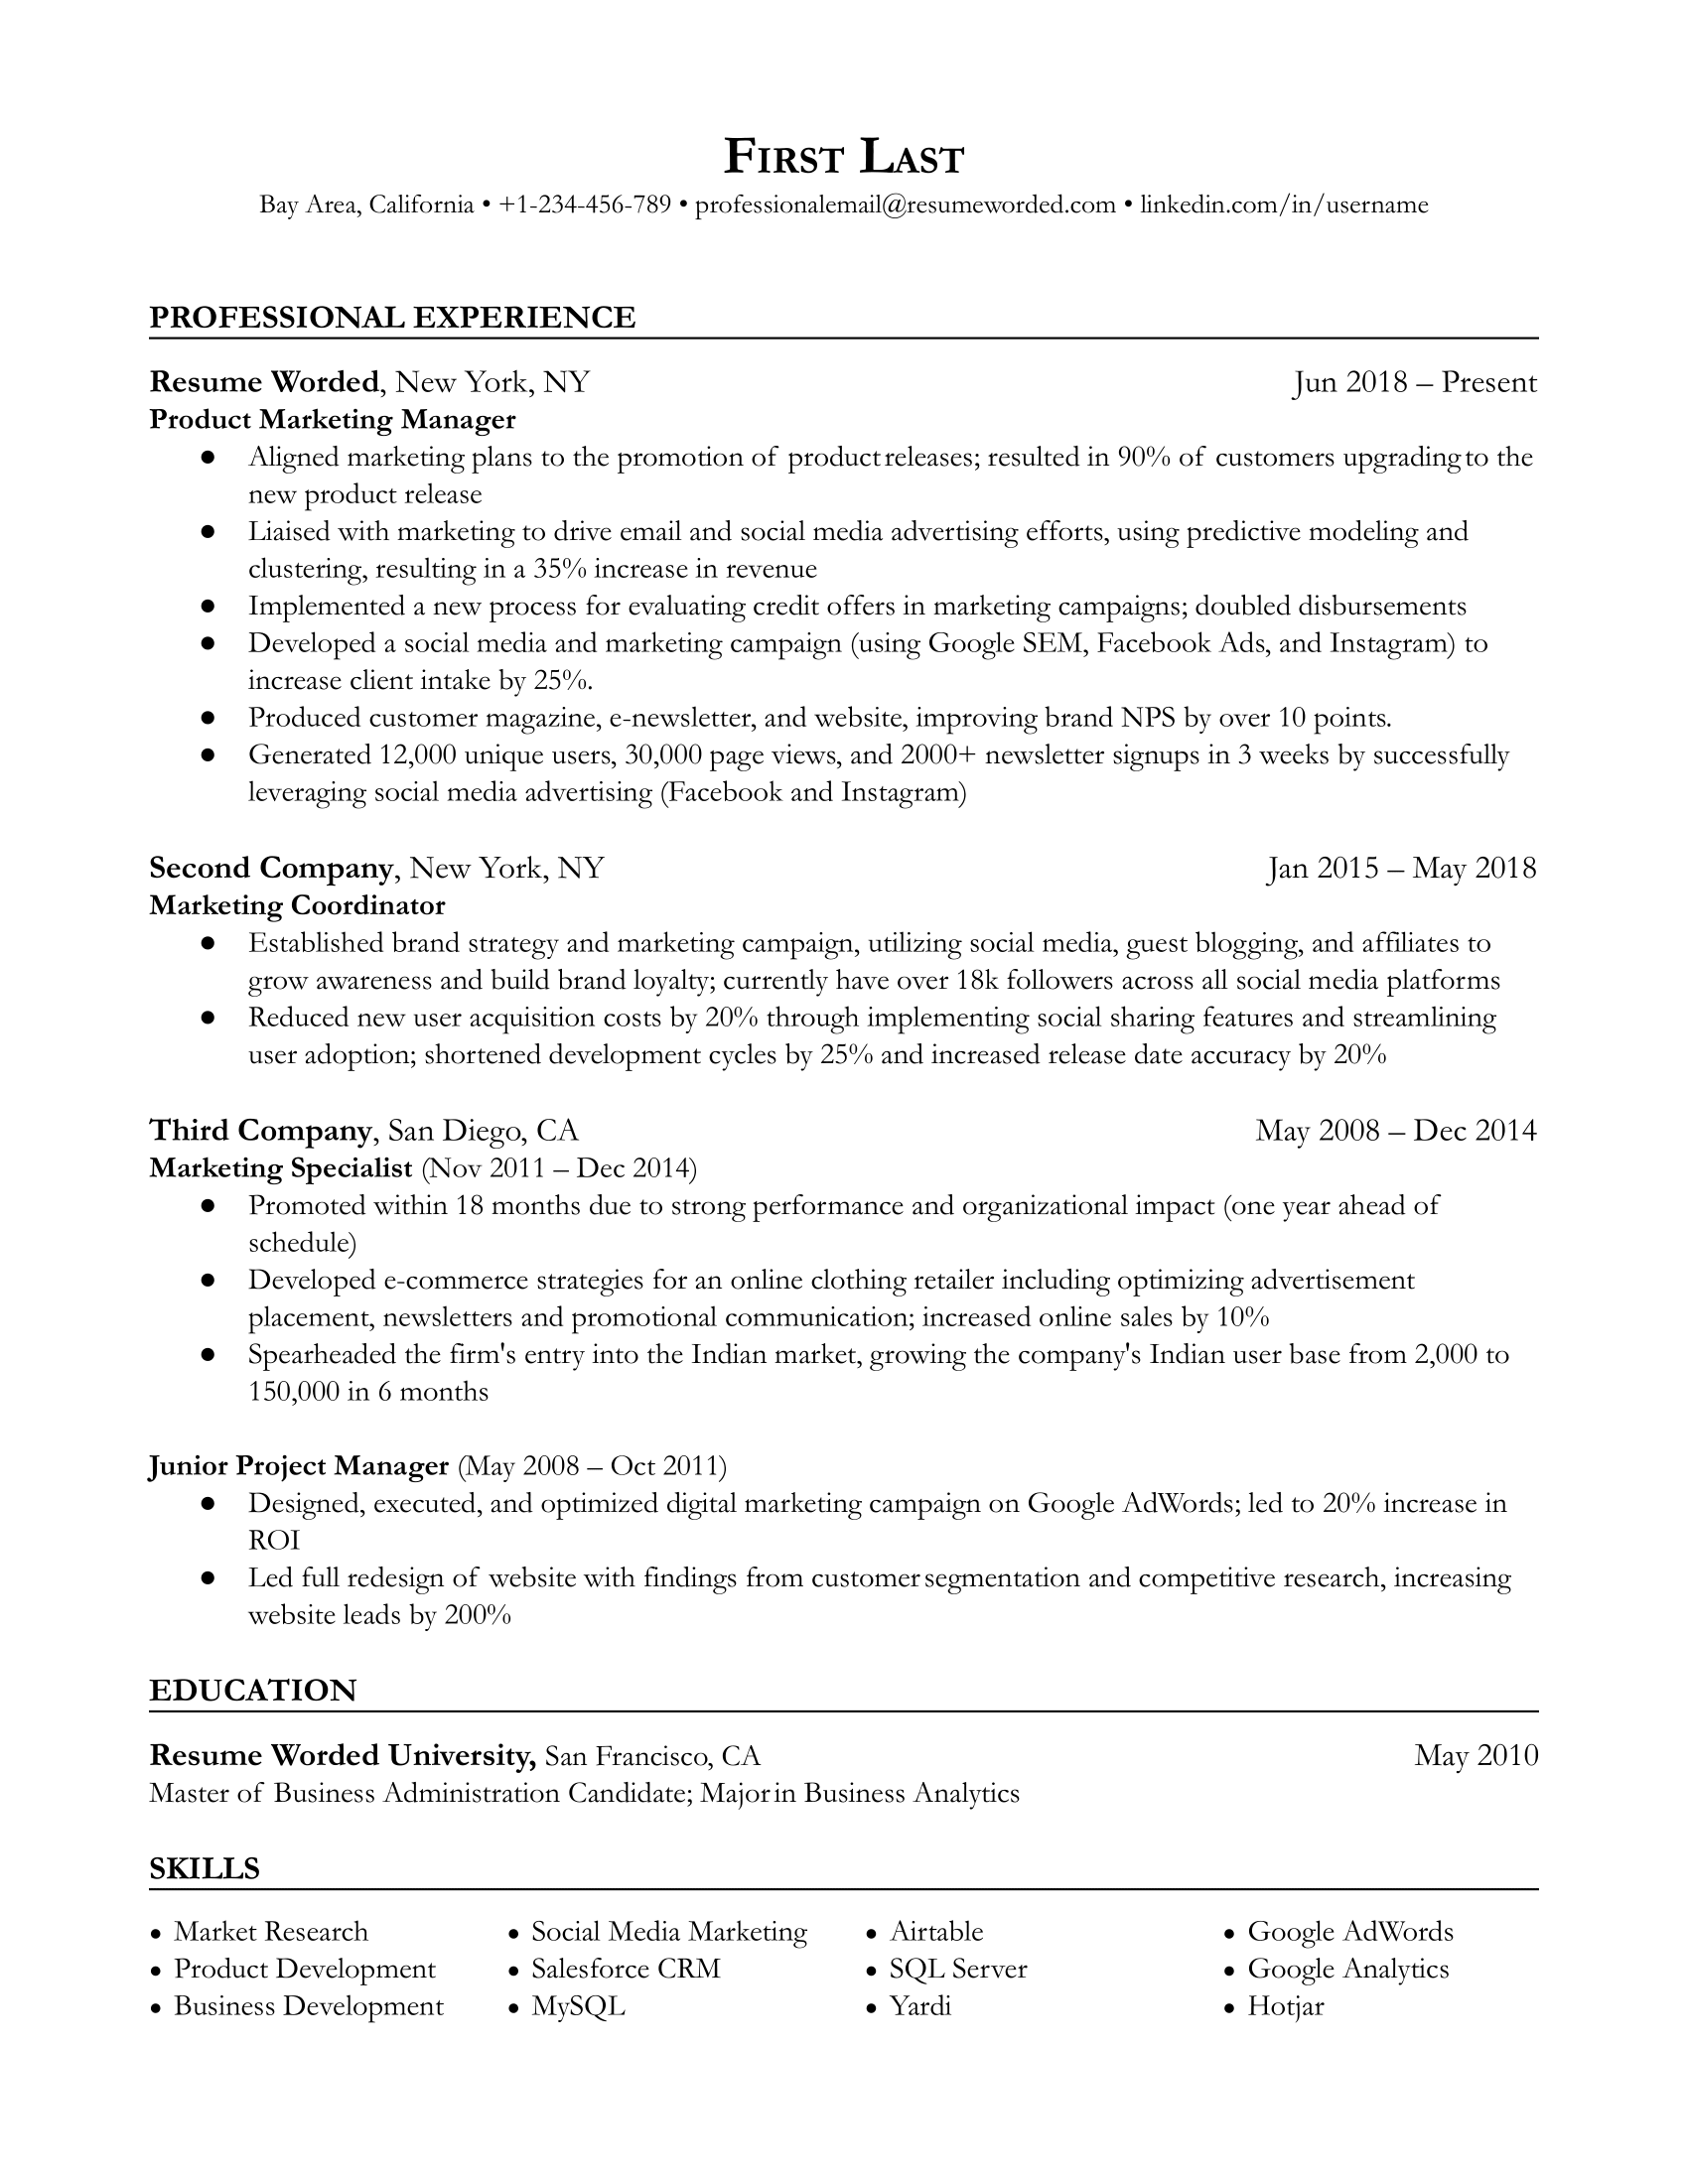 A resume for a product marketing manager with a master's degree in business and experience as a marketing coordinator.